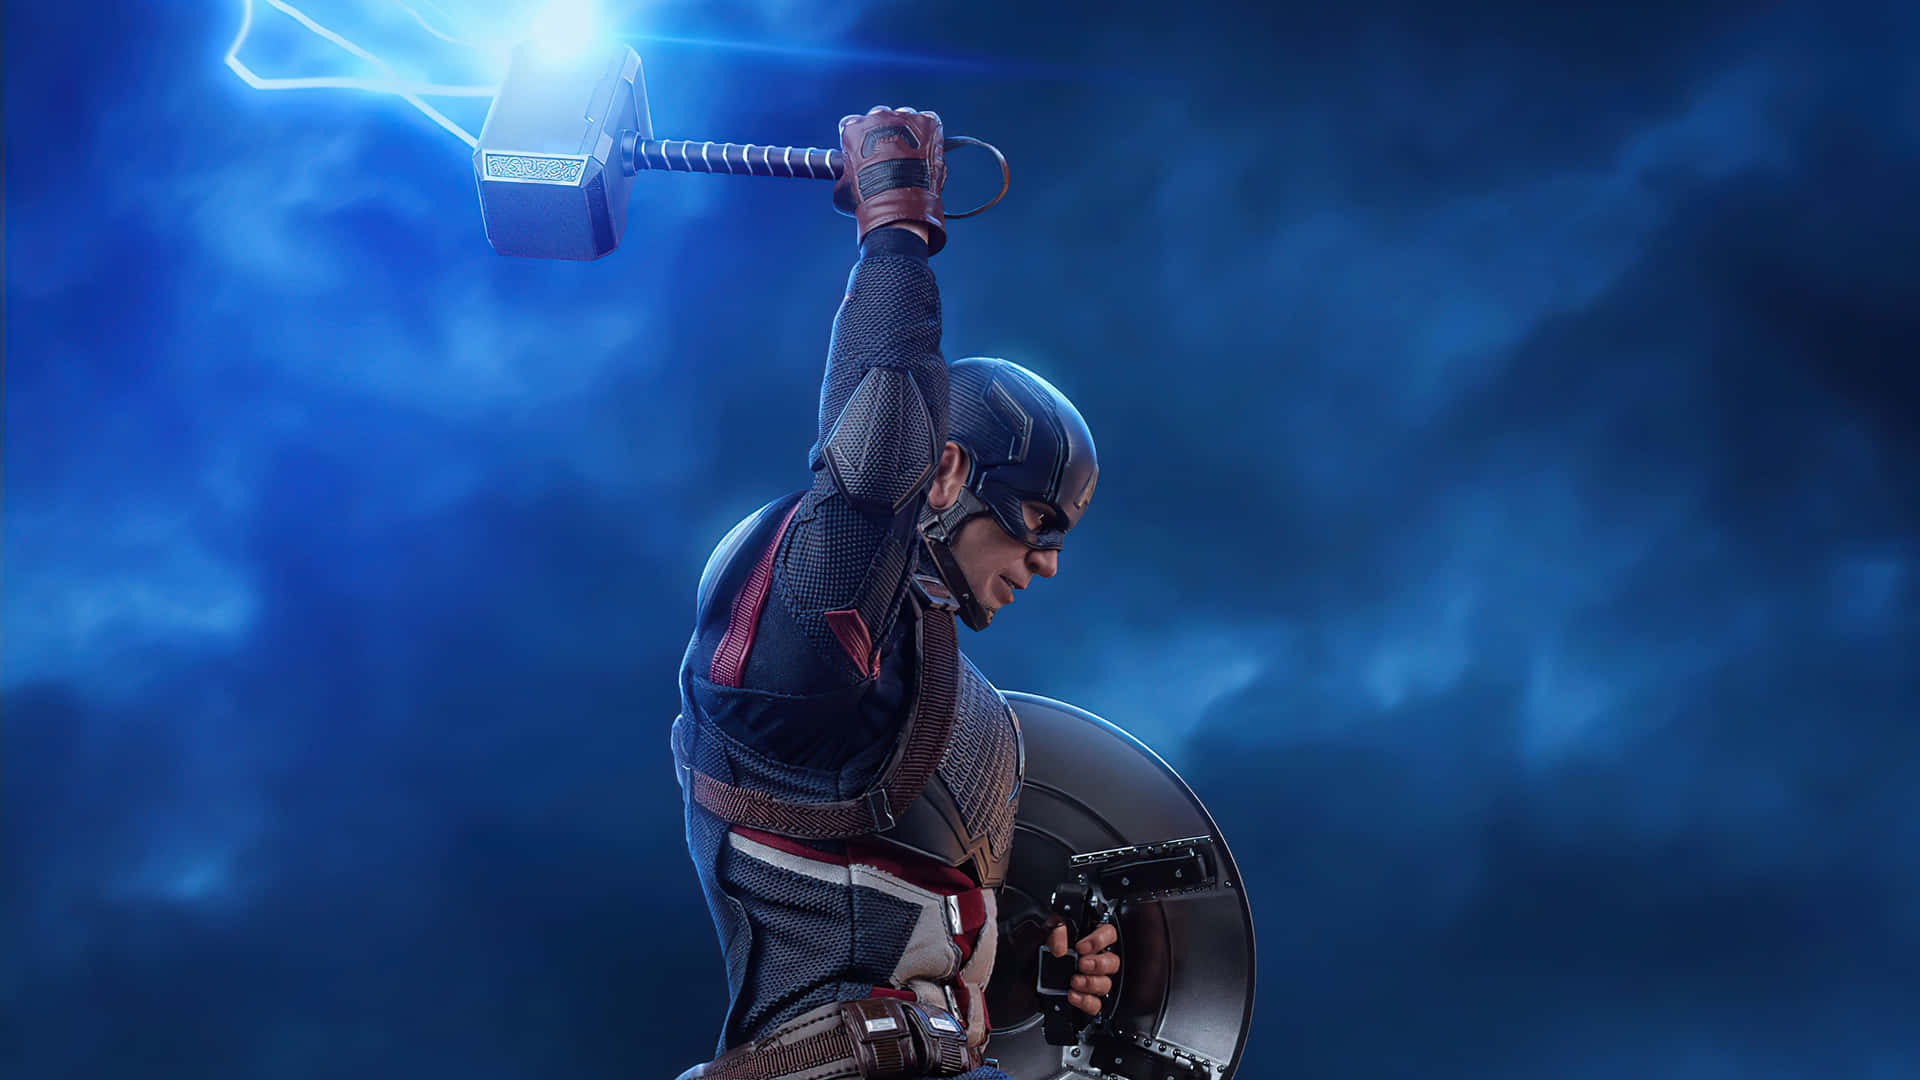 "Unite the Heroes: Captain America rises to the challenge in Avengers: Endgame." Wallpaper